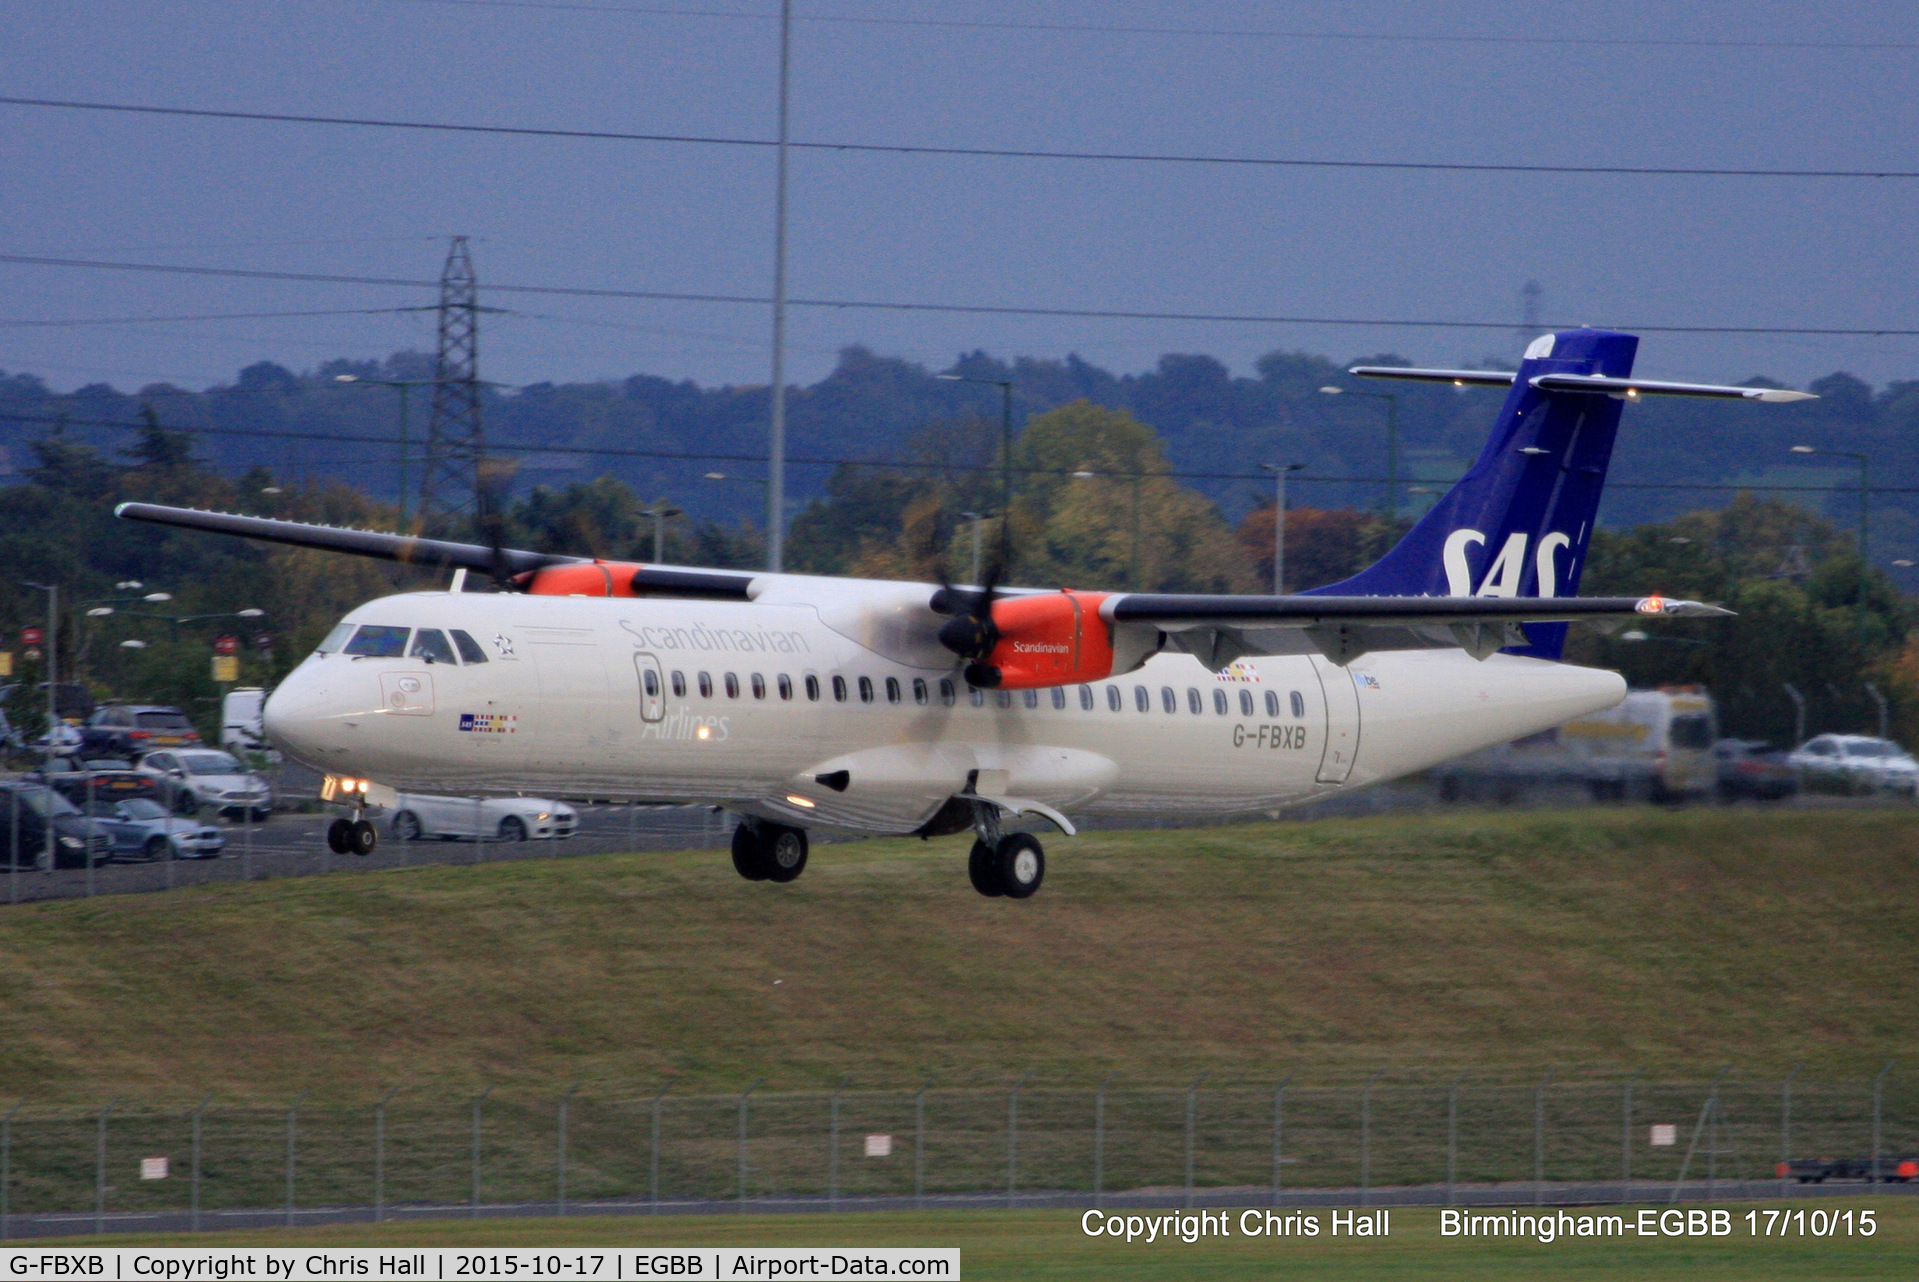 G-FBXB, 2015 ATR 72-212A C/N 1277, operated by flybe on behalf of SAS